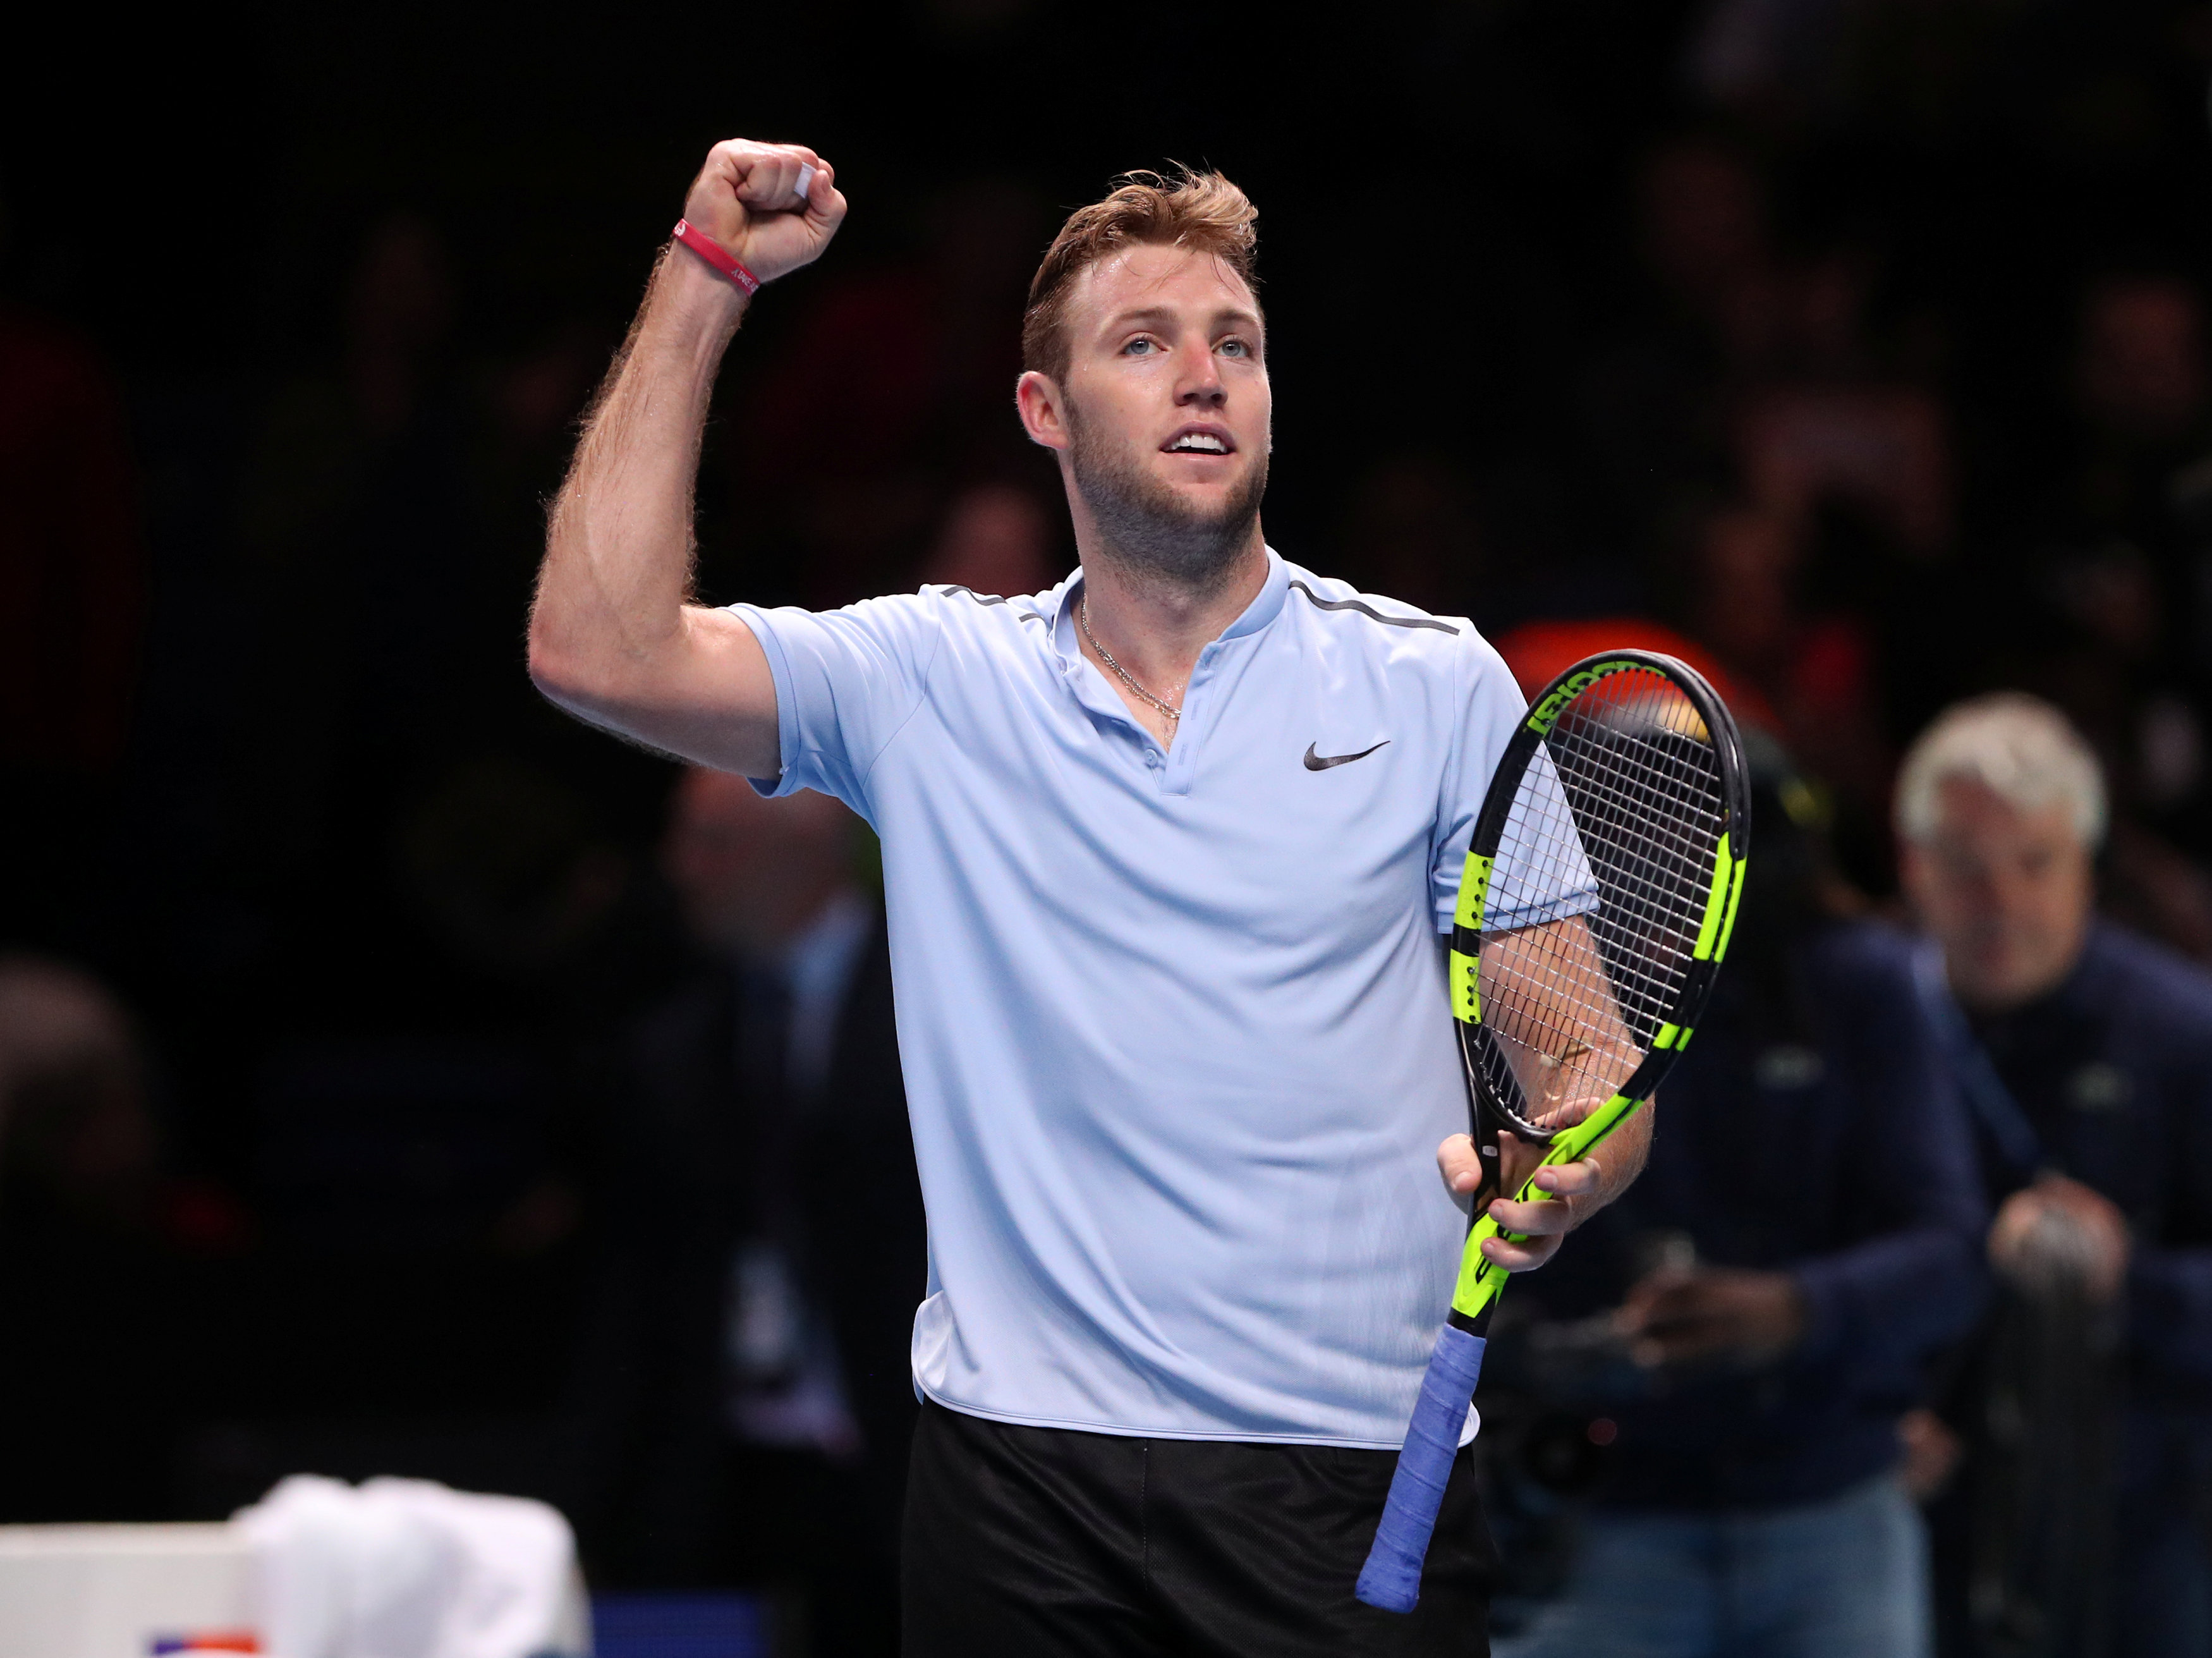 Tennis: Sock keeps hopes alive with win over erratic Cilic in ATP Finals